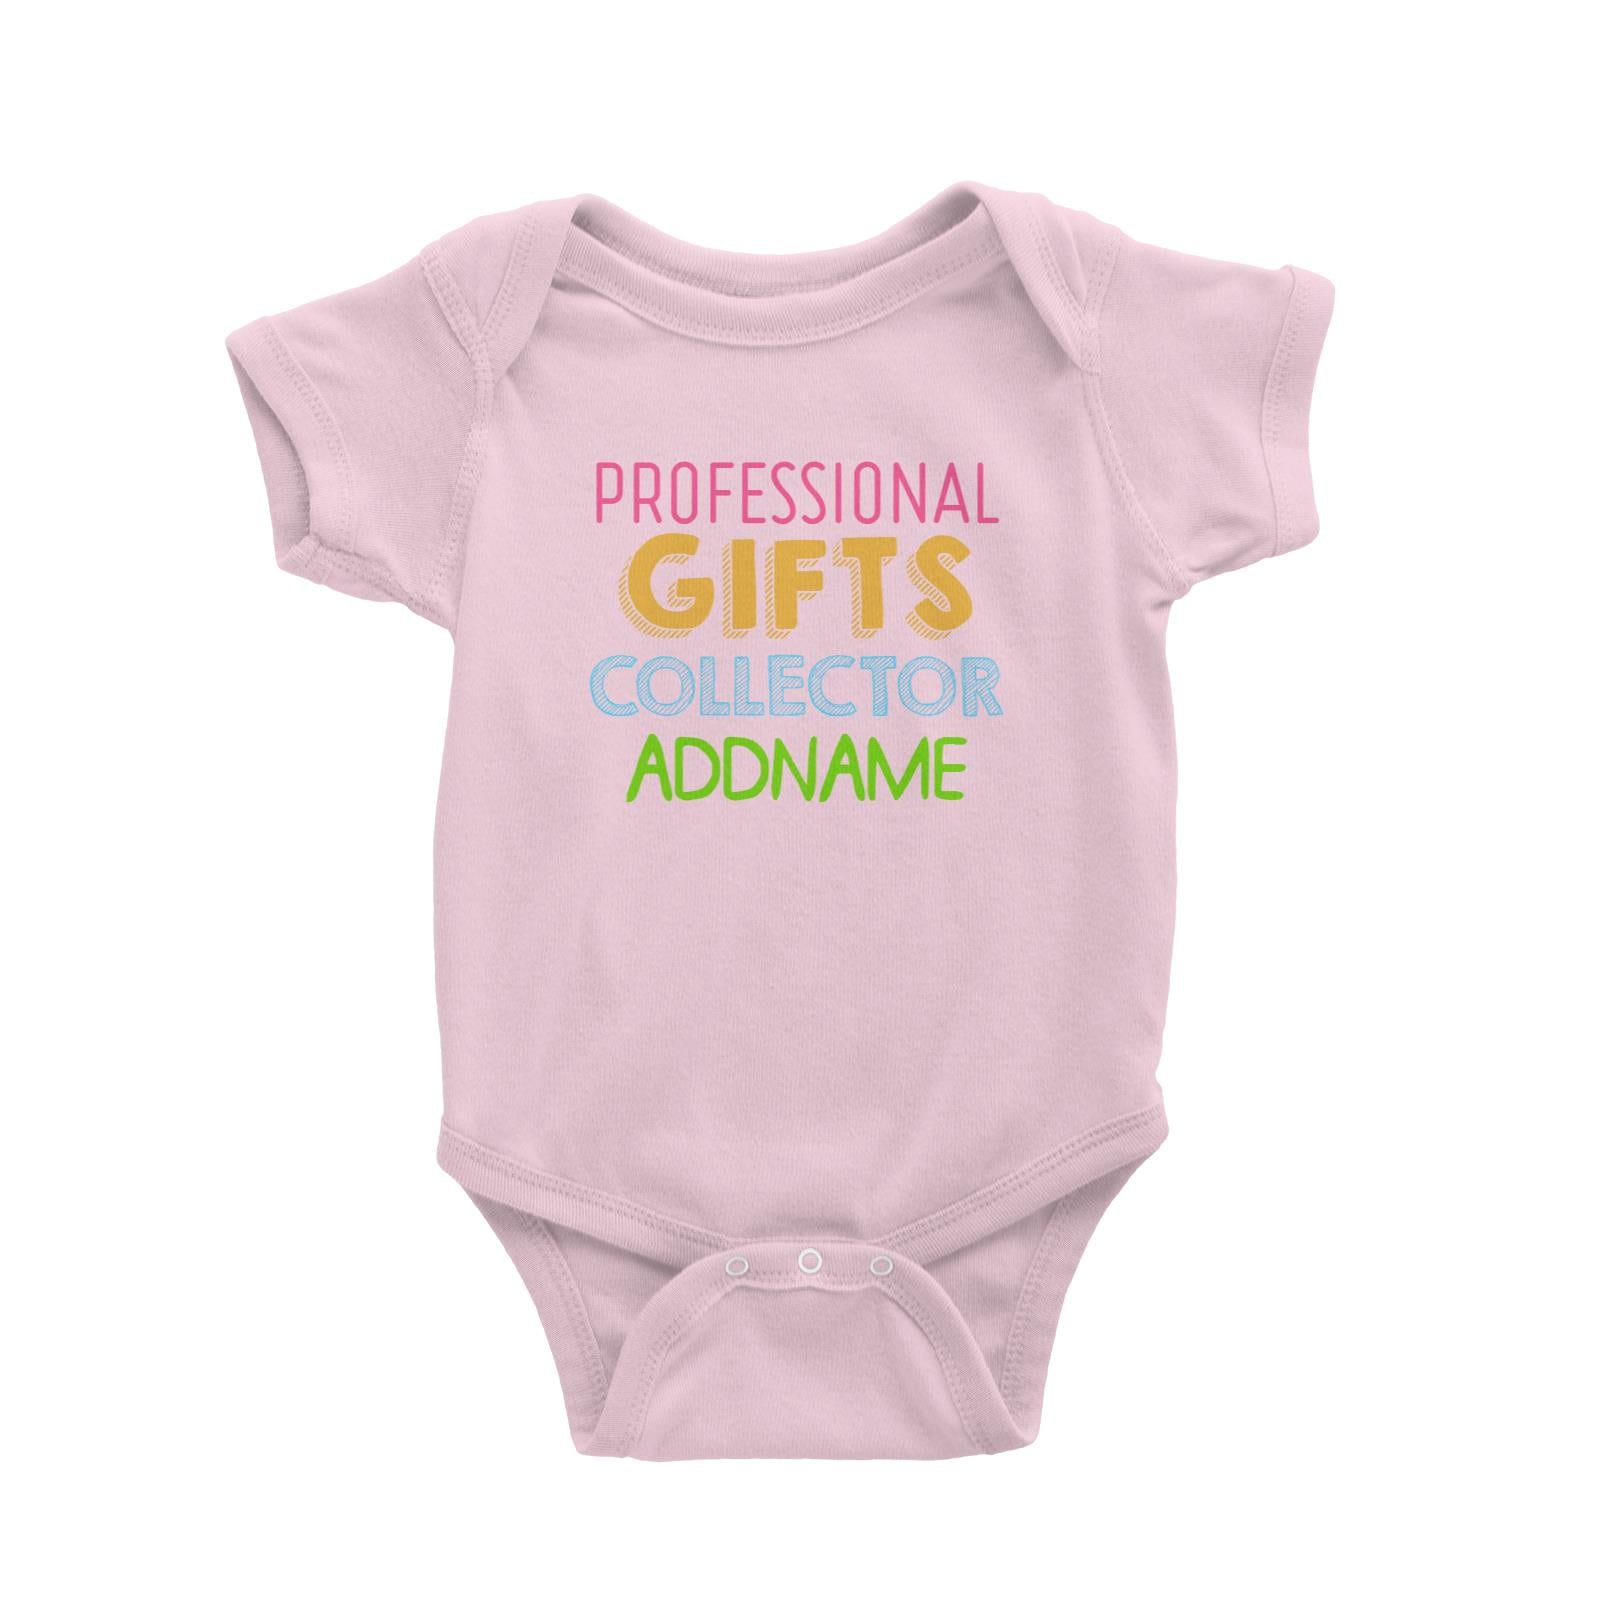 Professional Gifts Collector Addname Baby Romper